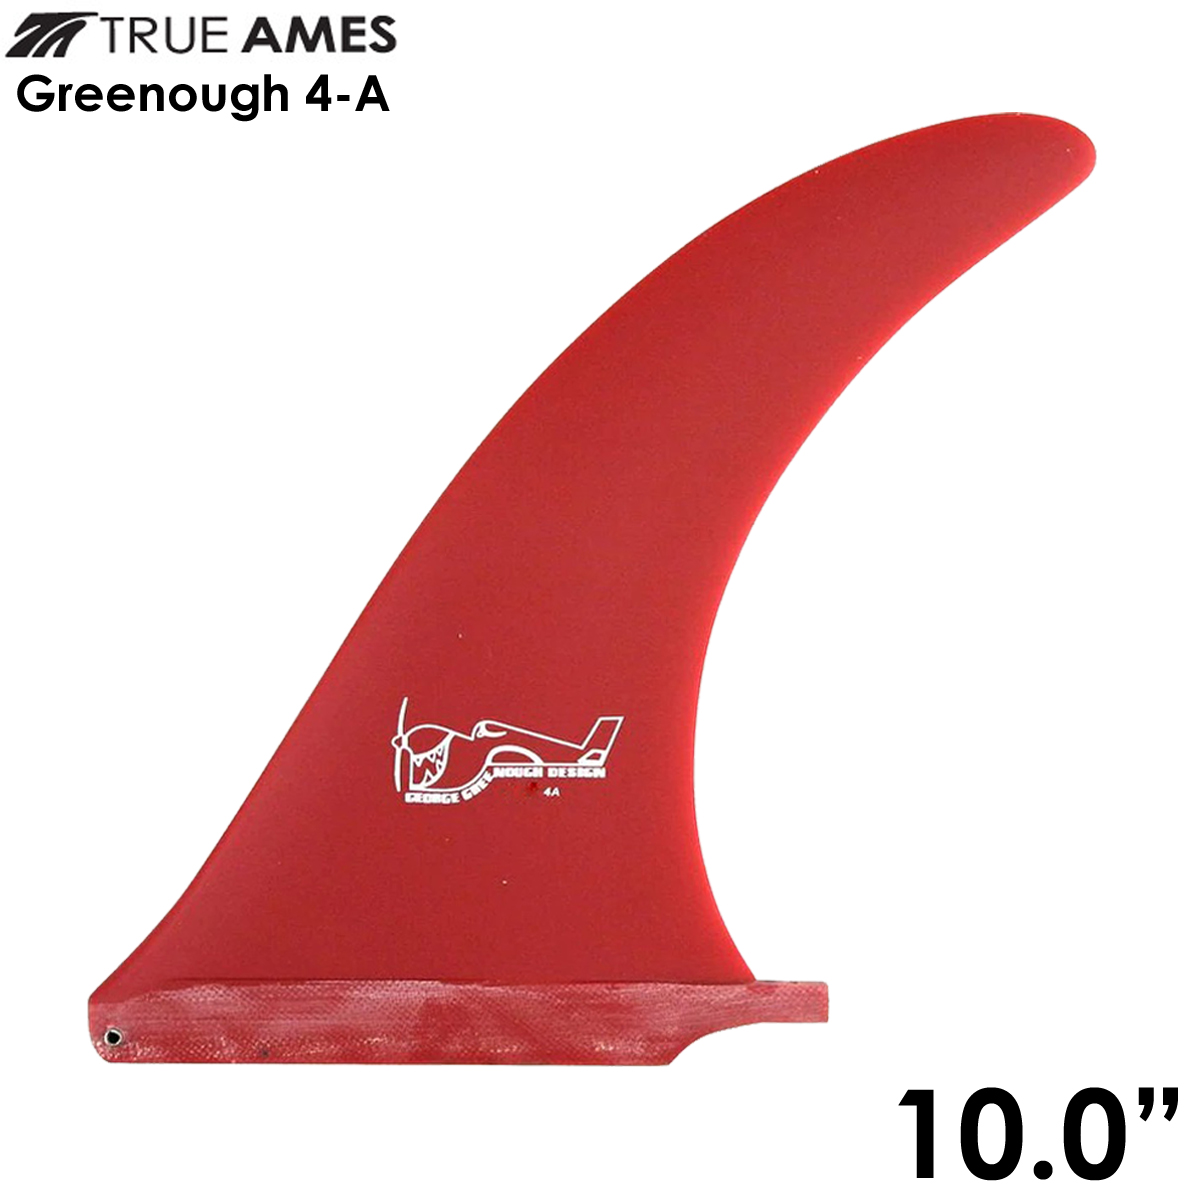 TRUE AMES グリノーフィン Greenough 4A 10.0" Sanded Solid Red トゥルーアムス フィン ロングボード センターフィン シングルフィン サーフィン グリノウ 4-A